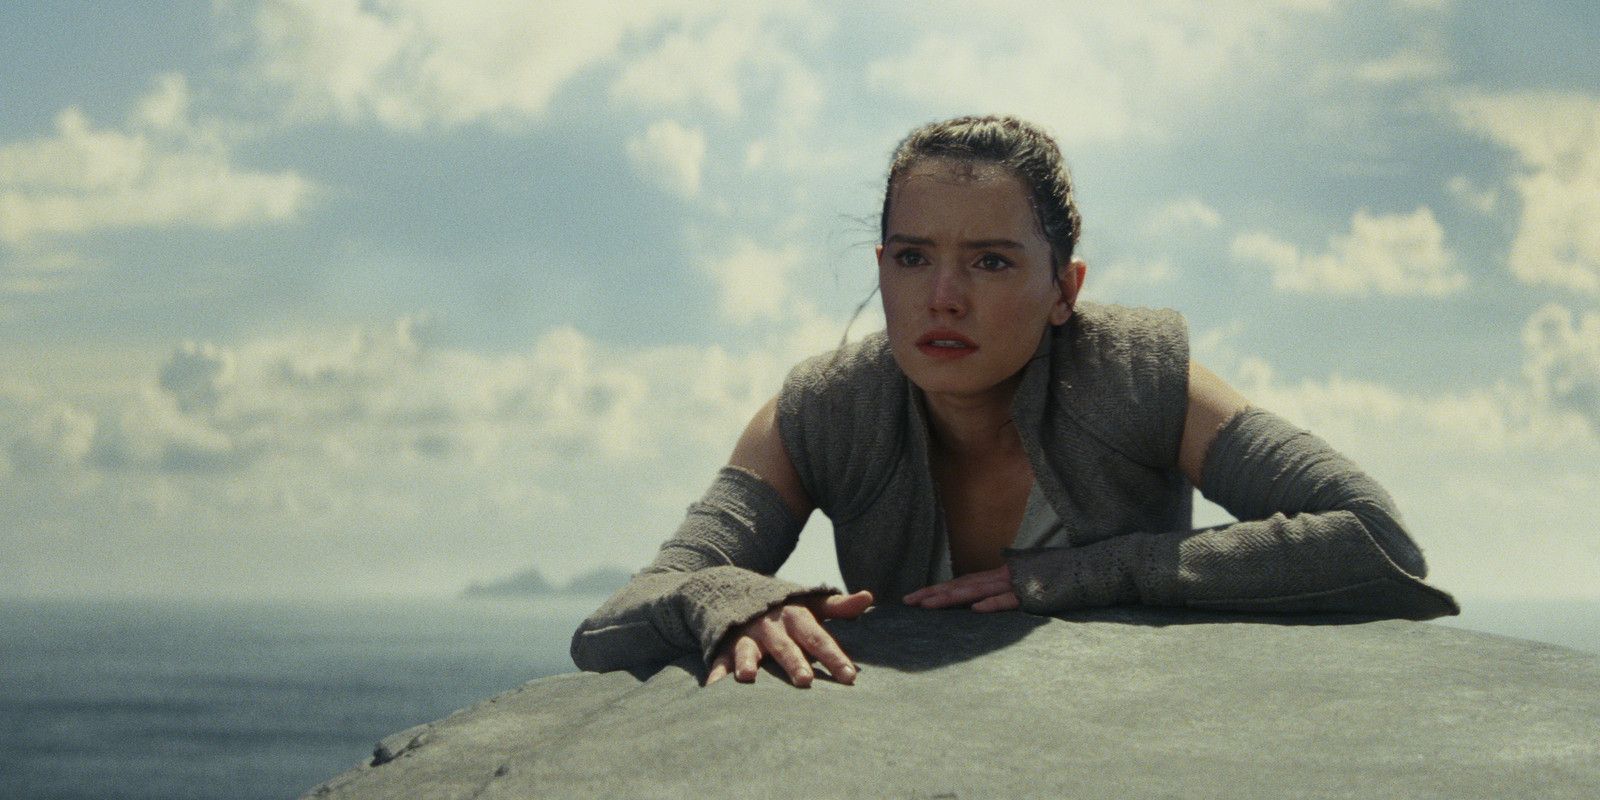 The Last Jedi Doesn't Have A Post-Credits Scene - But You Should Stick Around